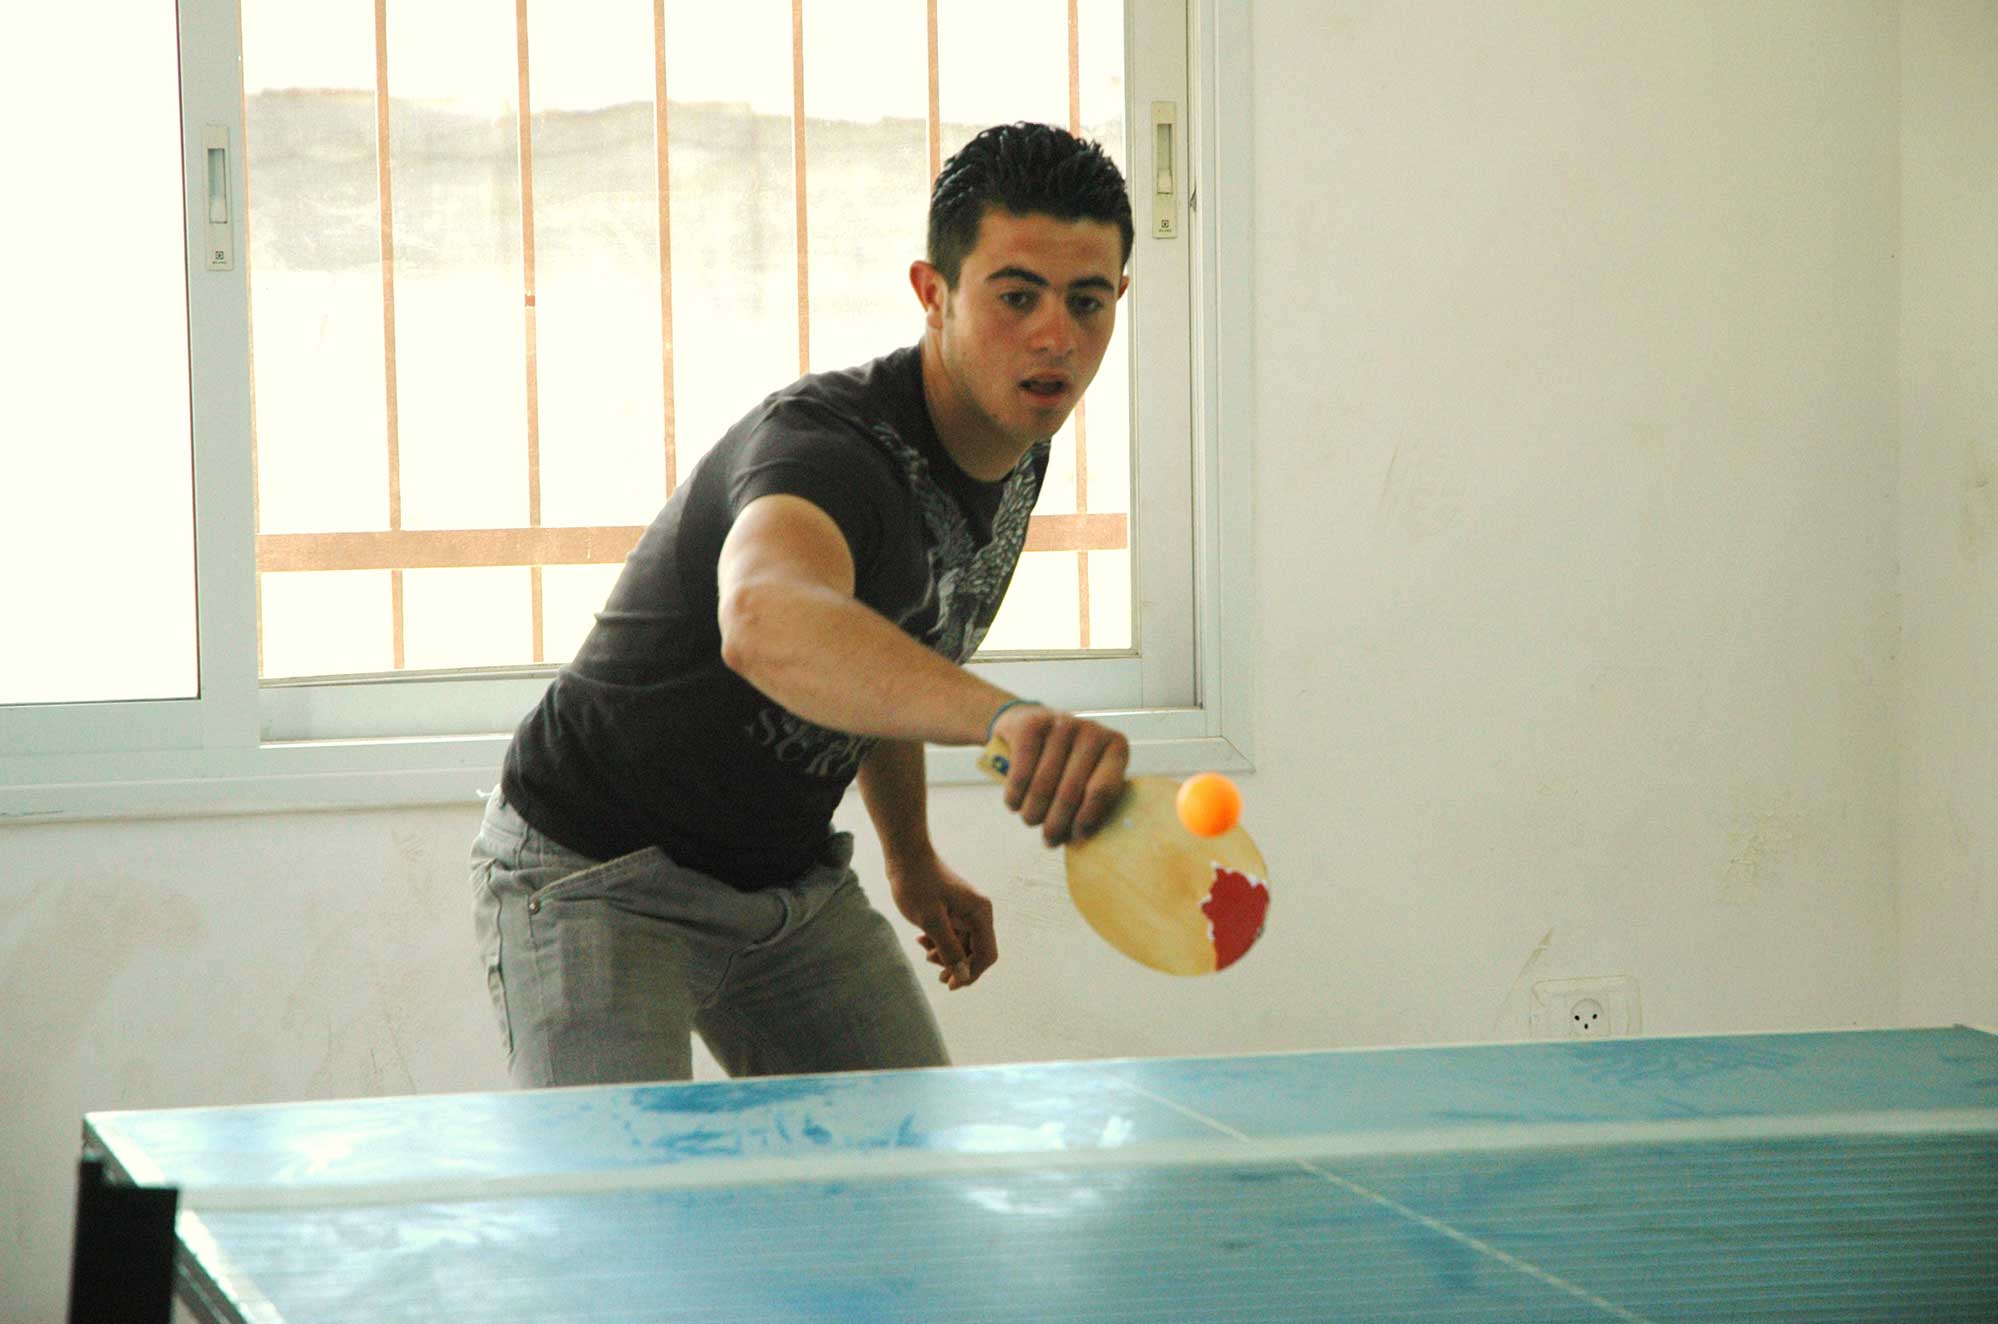 A Palestinian teenager plays table tennis at the new community center in Jayyus in 2009.